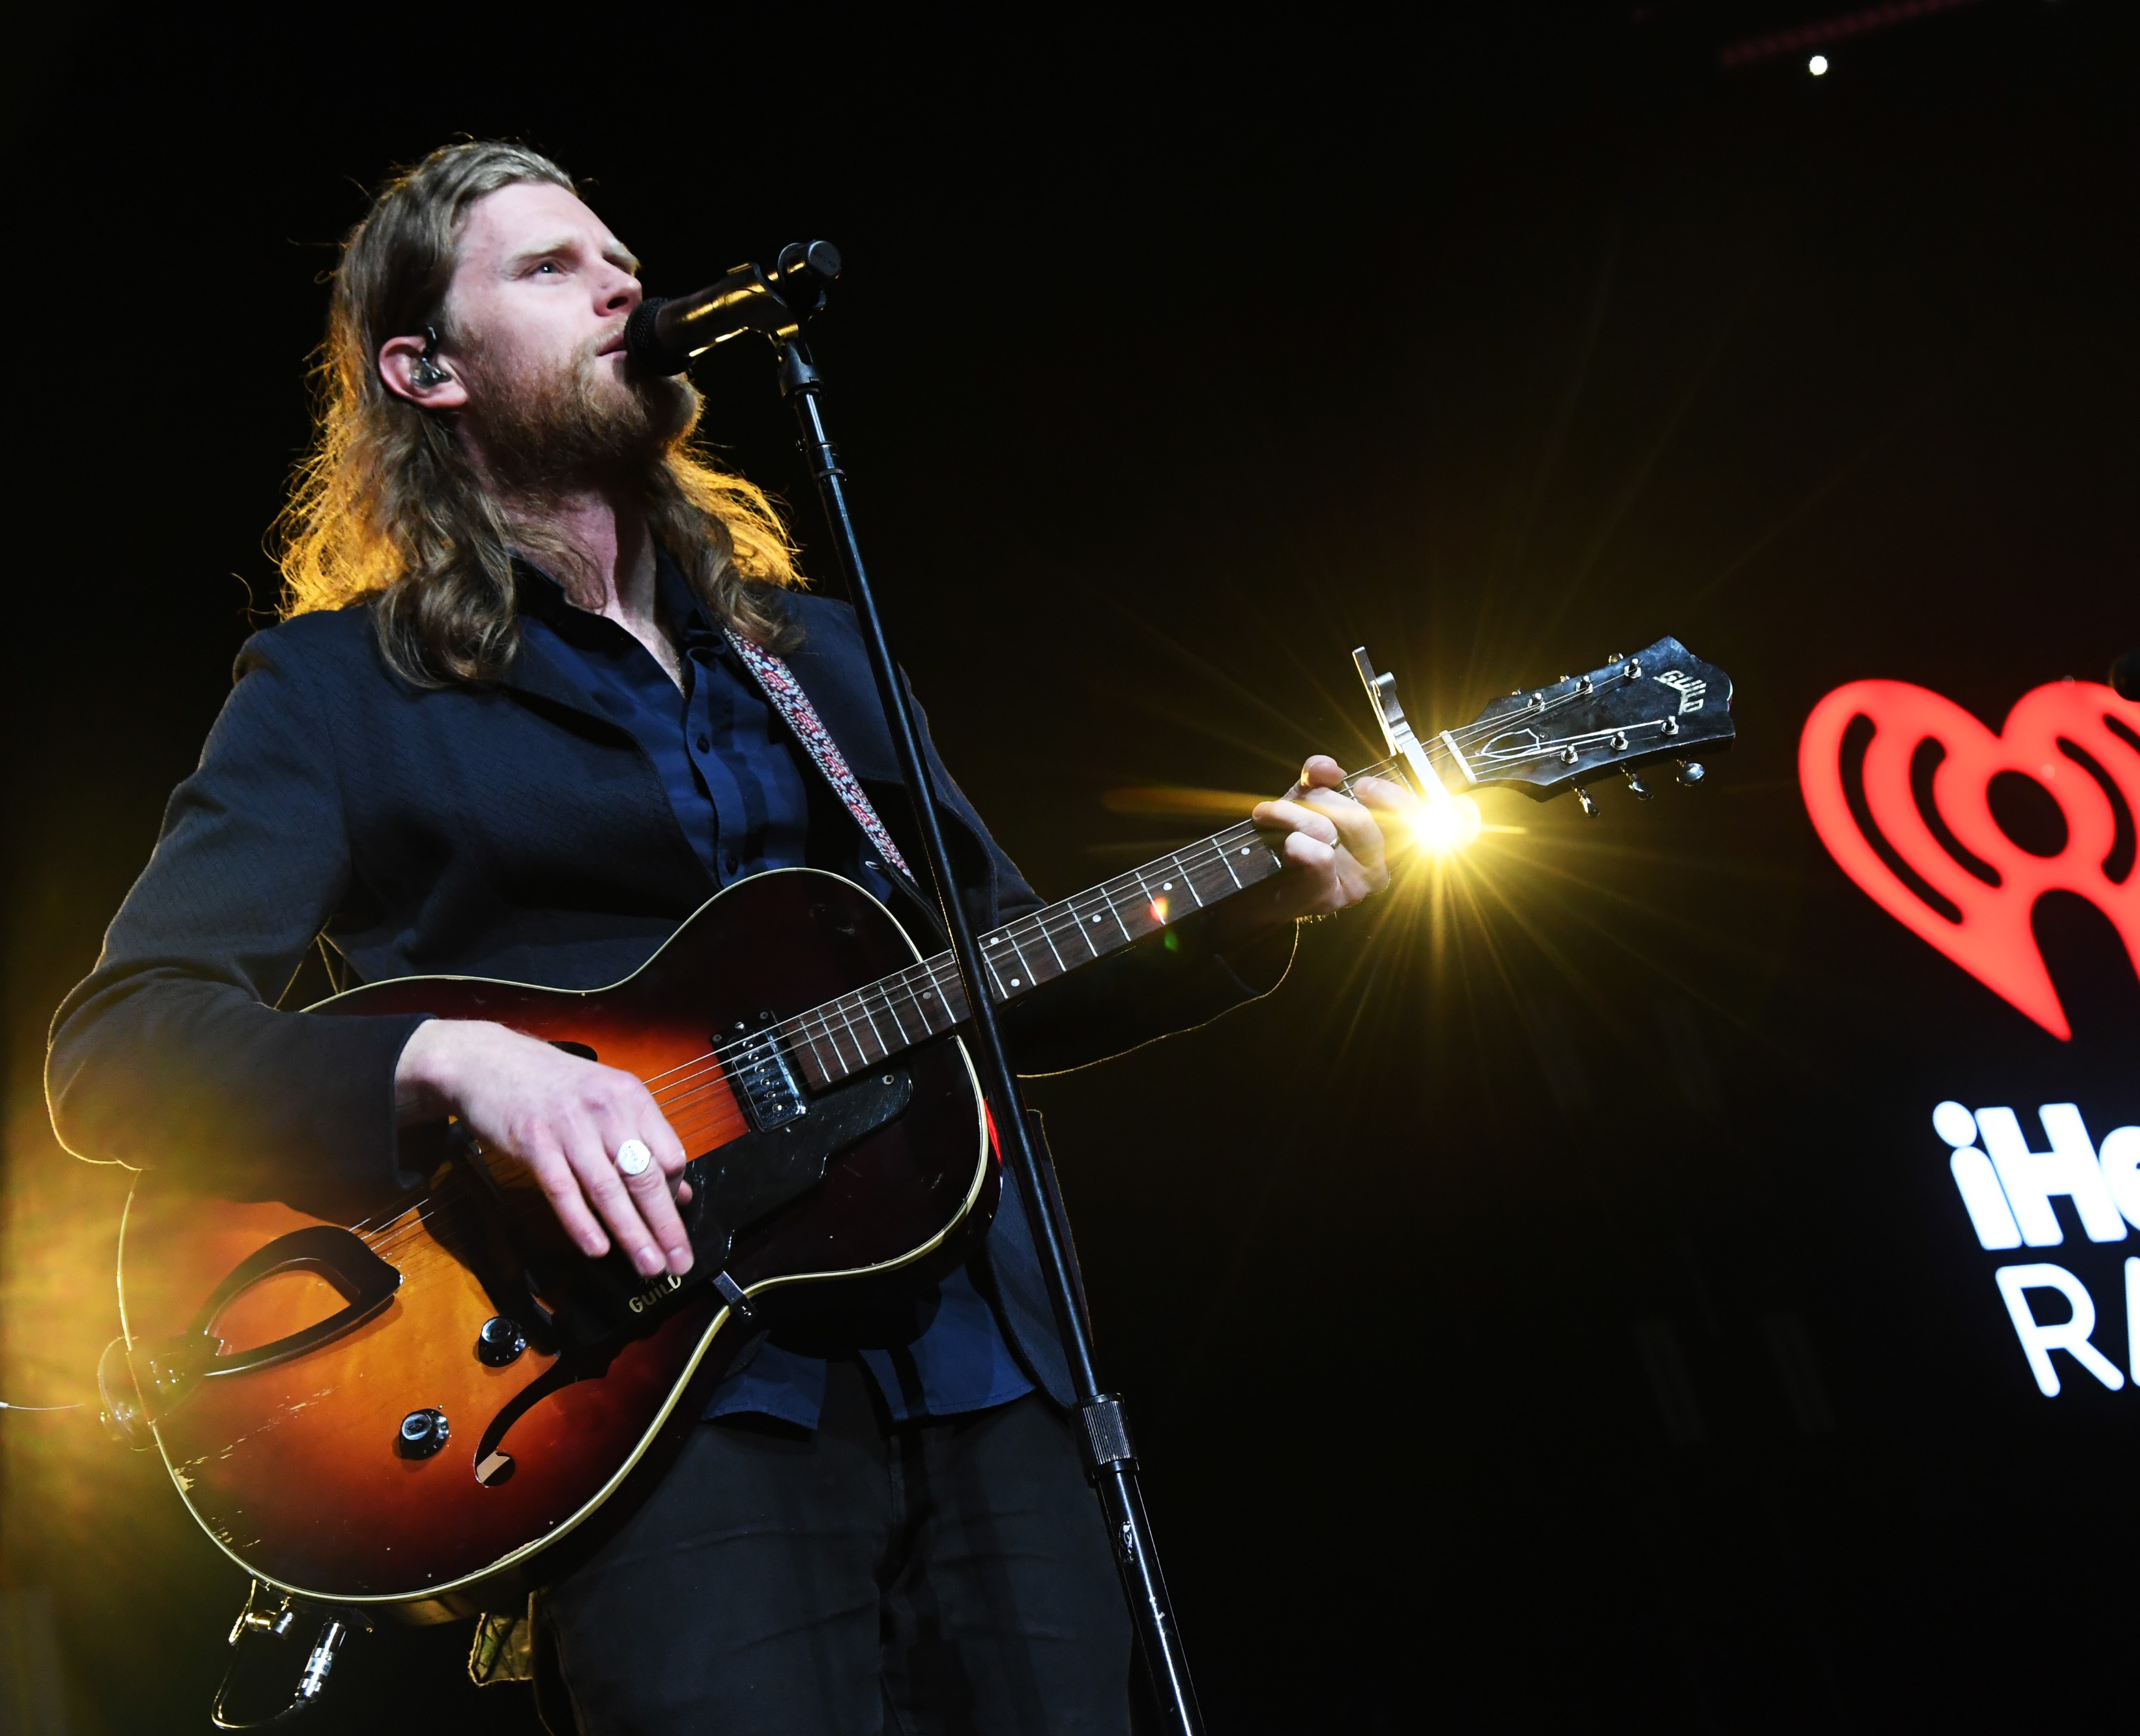 INGLEWOOD, CALIFORNIA - JANUARY 18: (FOR EDITORIAL USE ONLY) Wesley Schultz of The Lumineers performs onstage at the 2020 iHeartRadio ALTer EGO at The Forum on January 18, 2020 in Inglewood, California. (Photo by Jeff Kravitz/FilmMagic for iHeartMedia ) (Foto: FilmMagic for iHeartMedia)